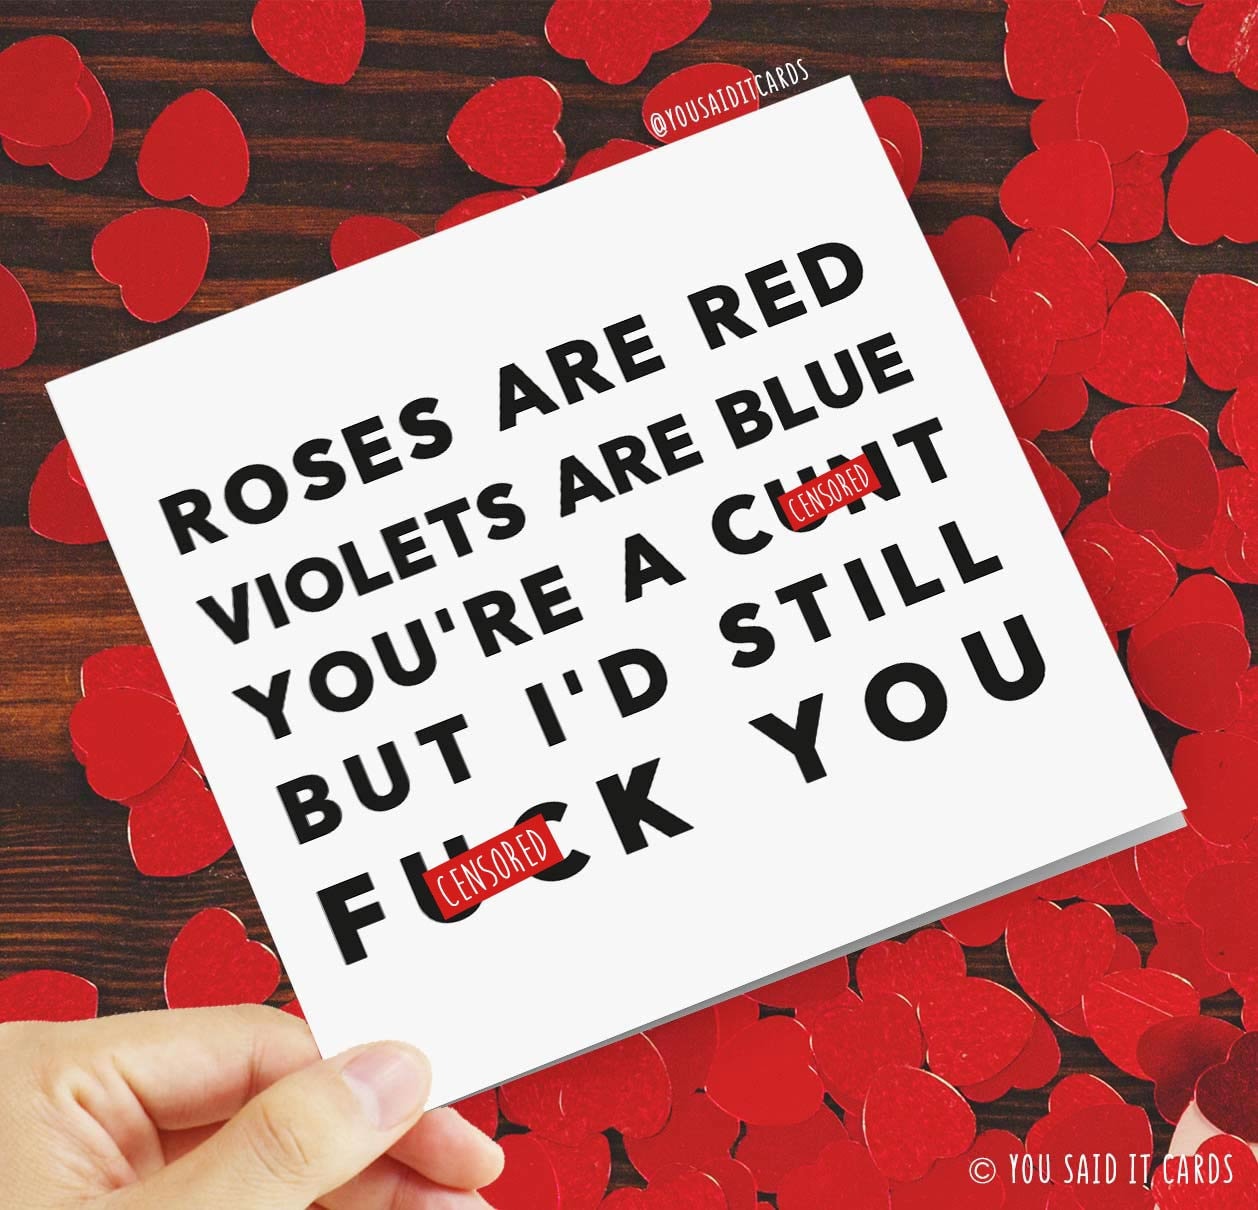 Roses Are Red Violets Are Blue You're Cunt but I'd - Etsy